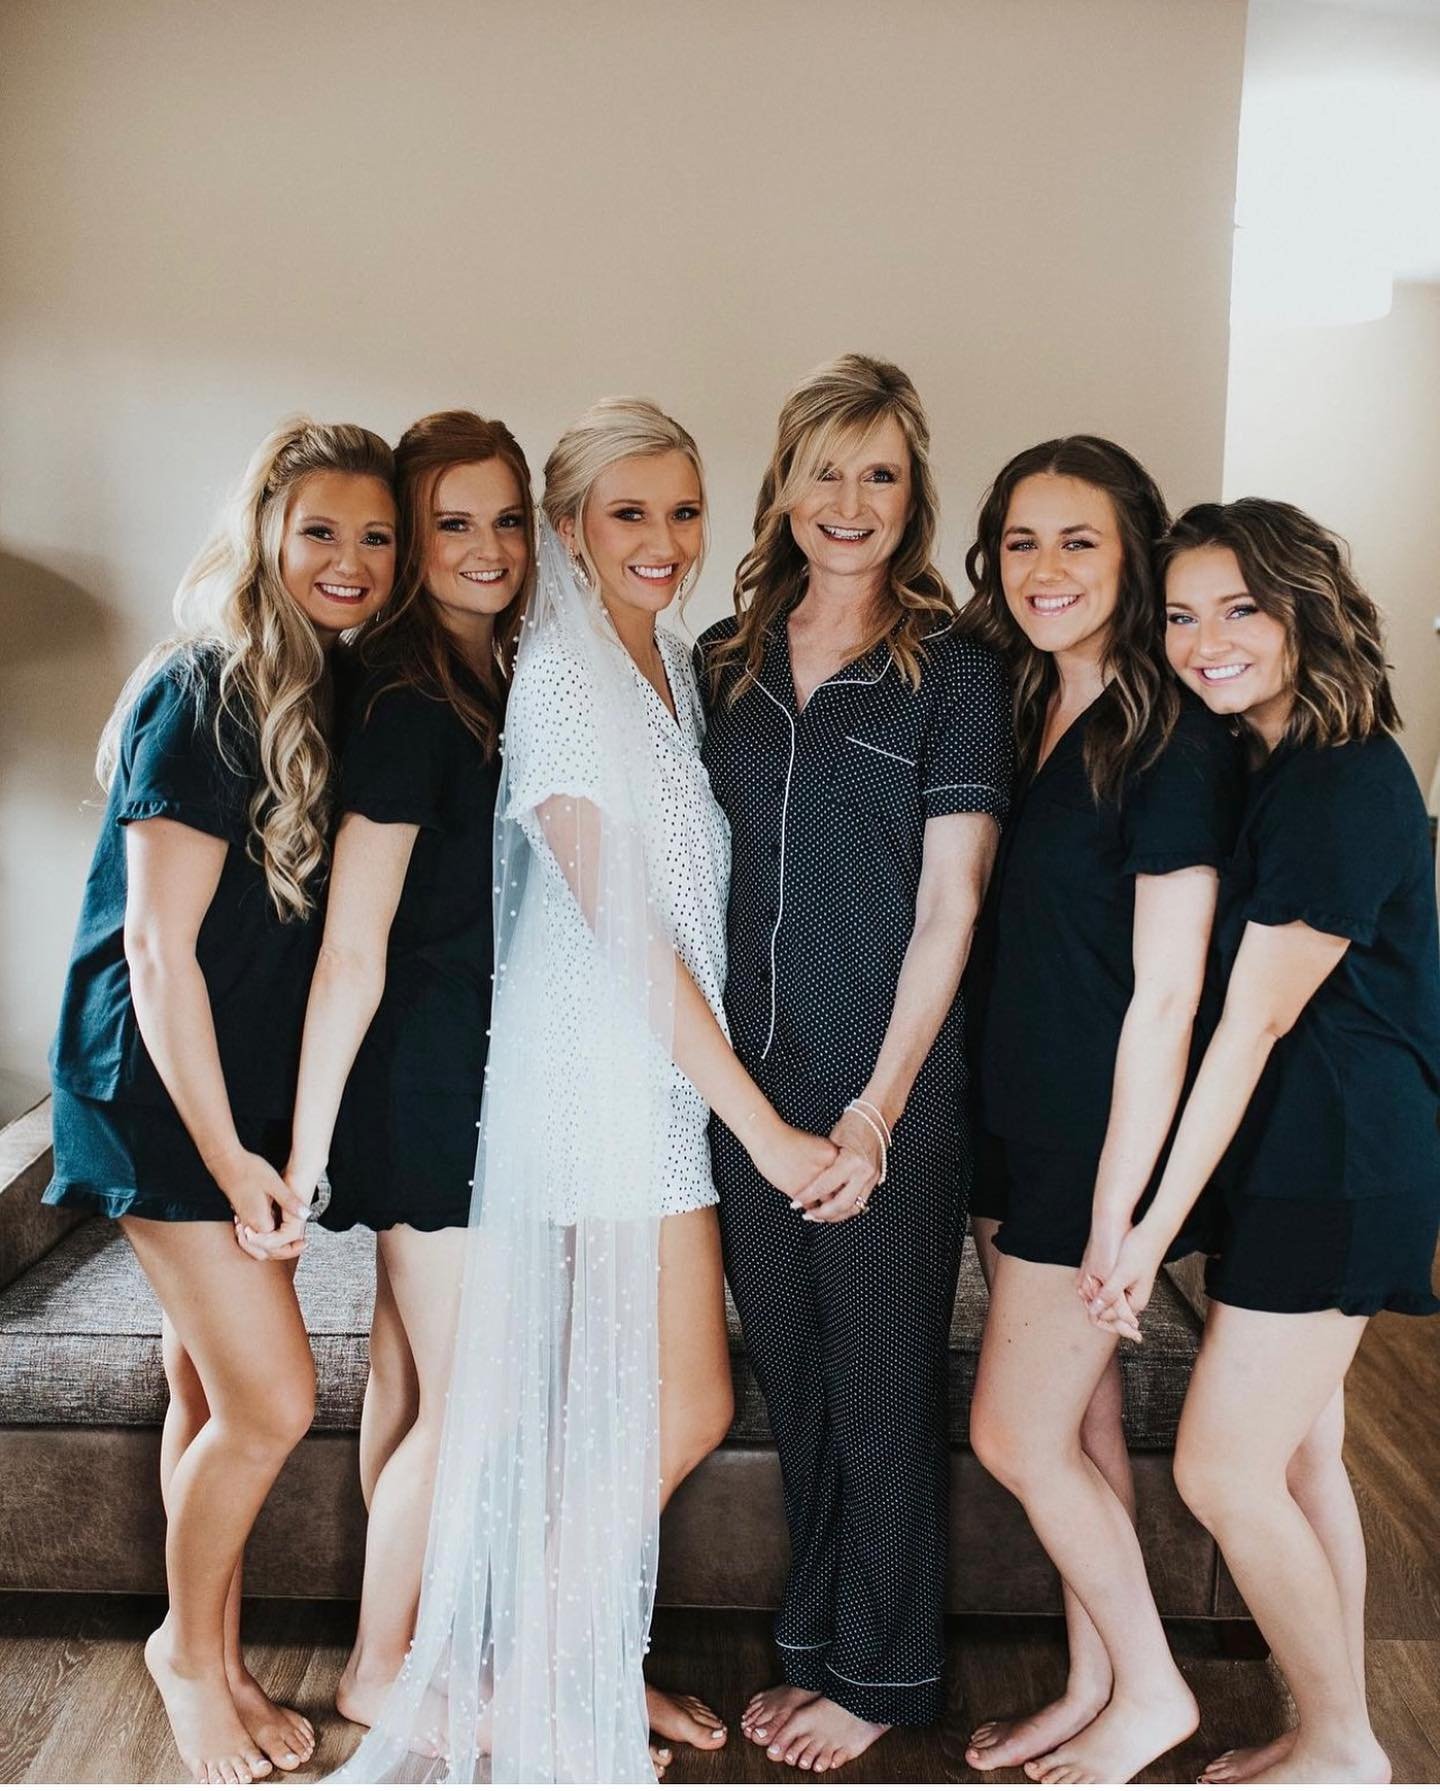  Makeup by Kenzie (first 4 on left)  Bride: Macy Vance  Photography: Katie Mary Photography   